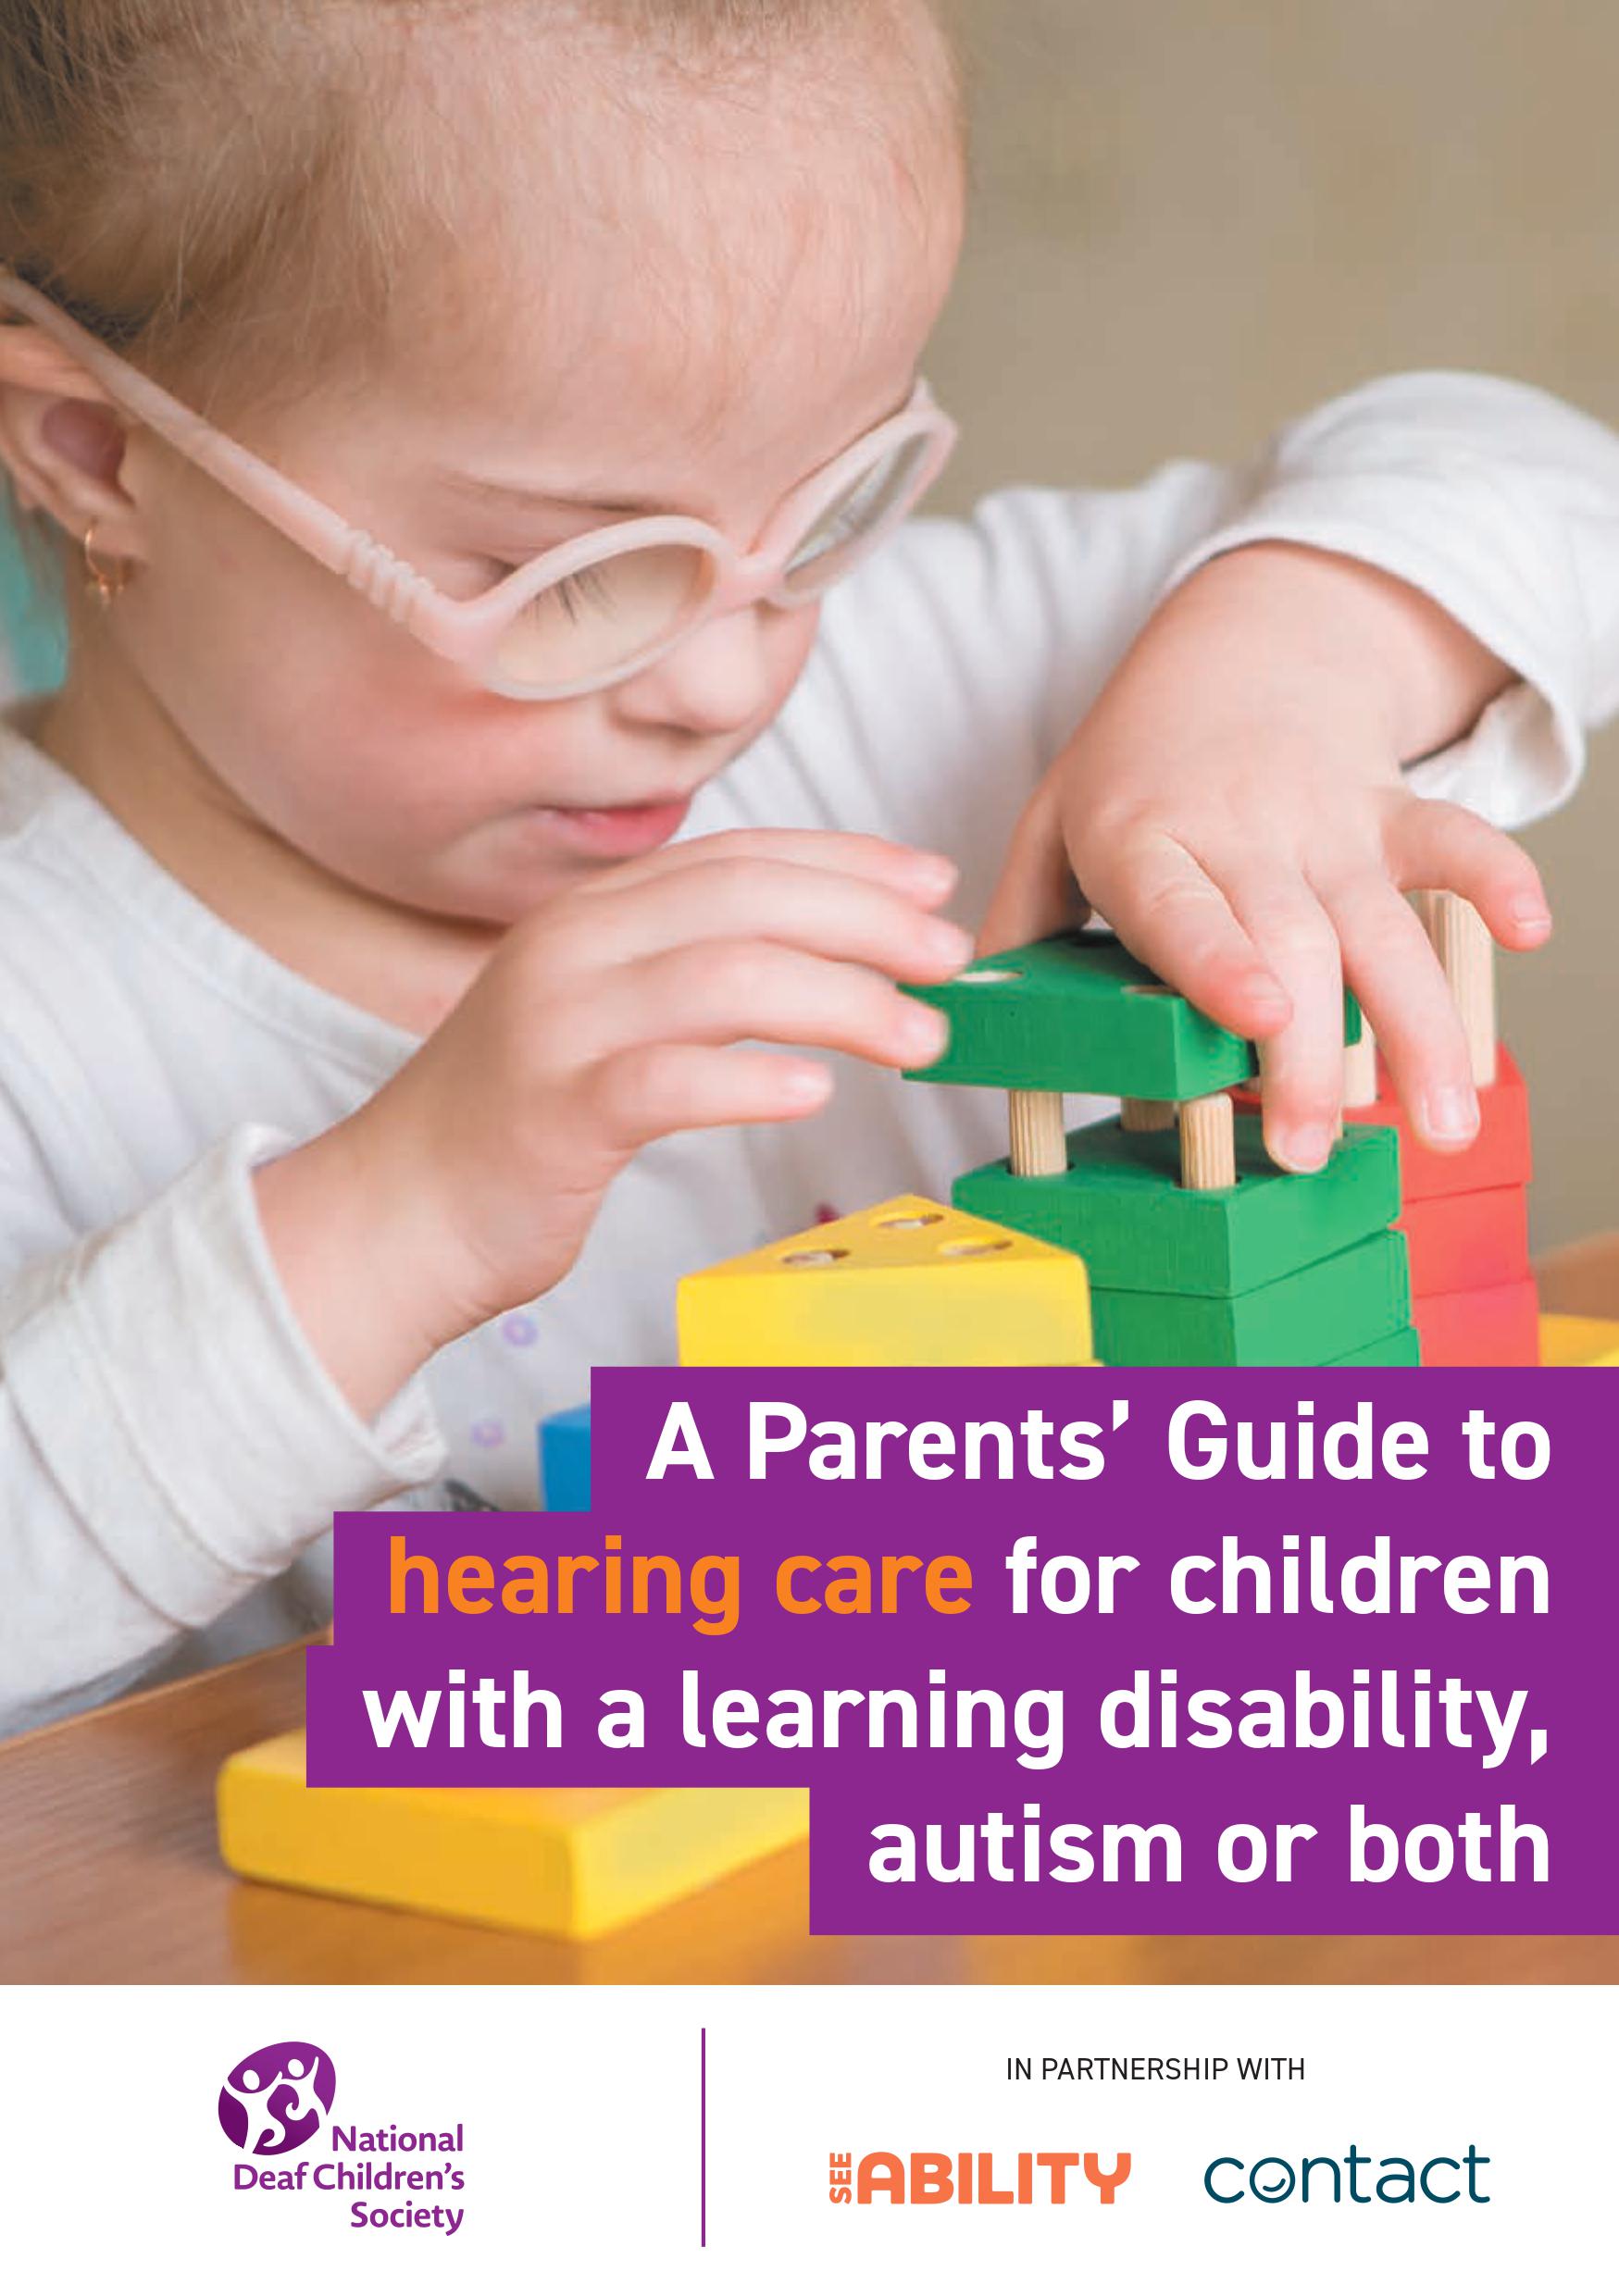 A parents' guide to hearing care for children with a learning disability, autism or both